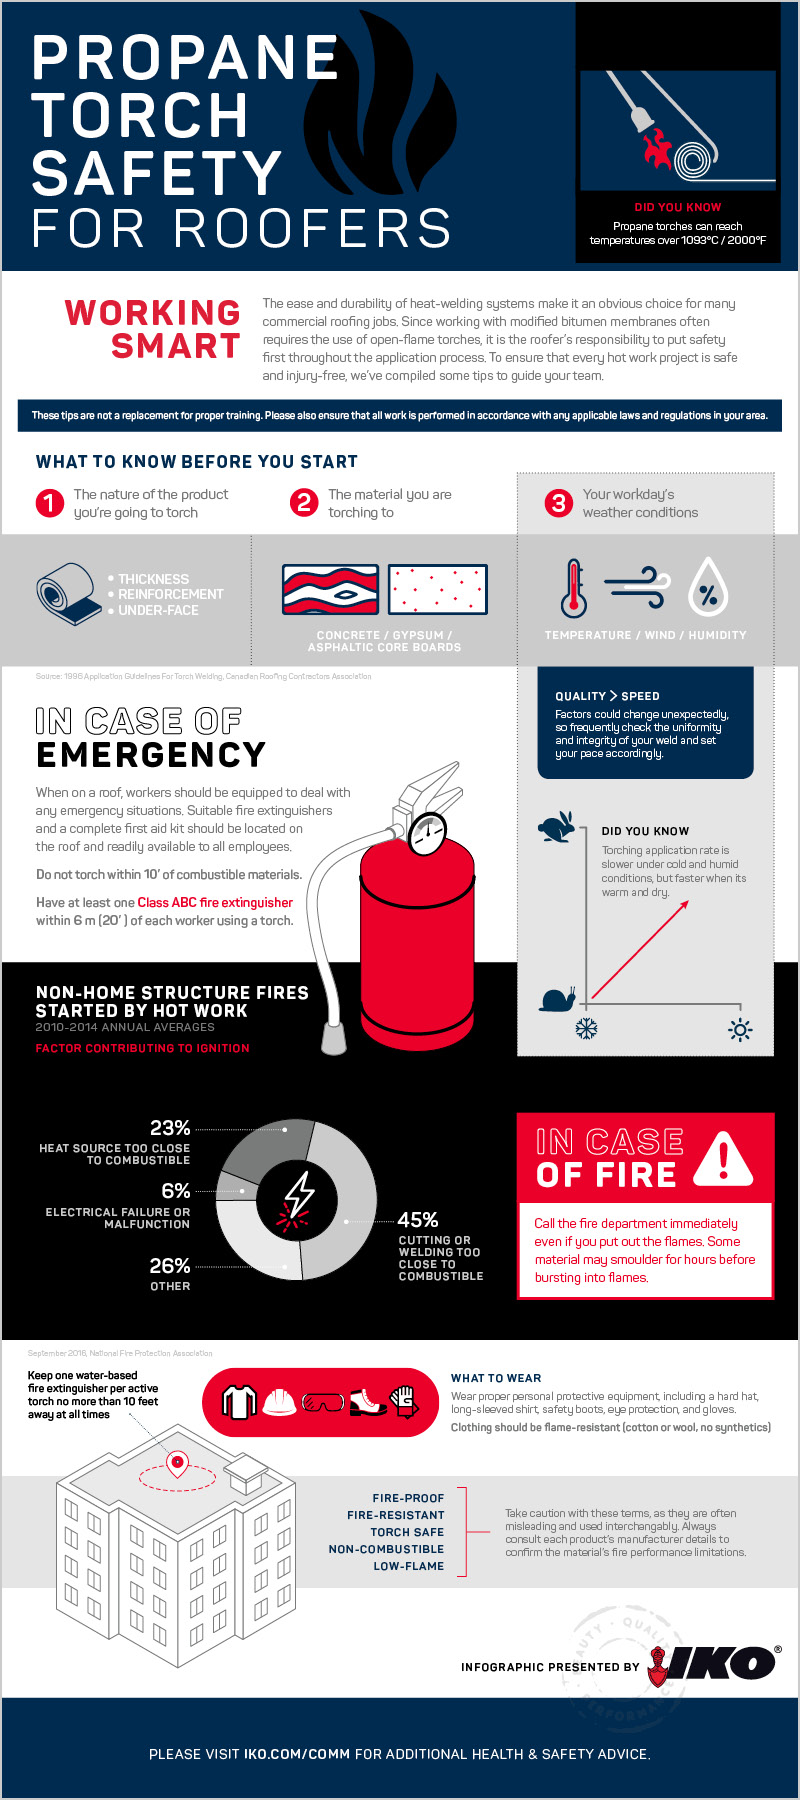 Propane Torch Safety for Roofers infographic